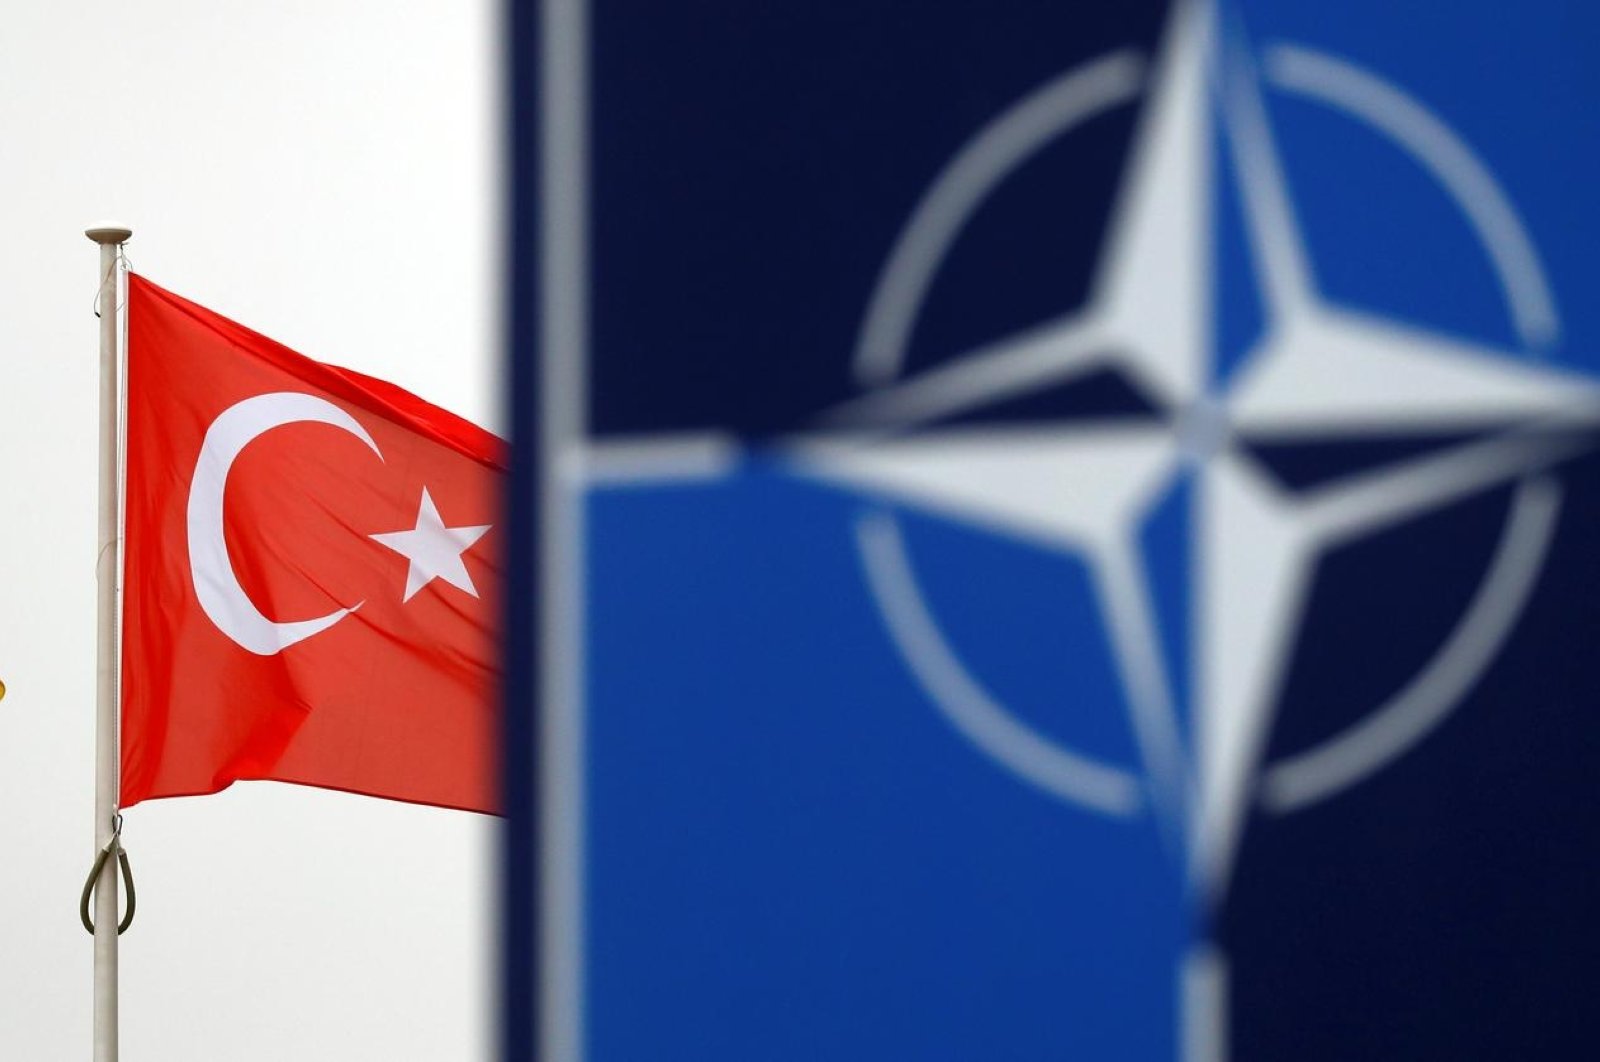 A Turkish flag flies next to the NATO logo at the alliance's headquarters in Belgium’s Brussels, Nov. 26, 2019. (Reuters Photo)